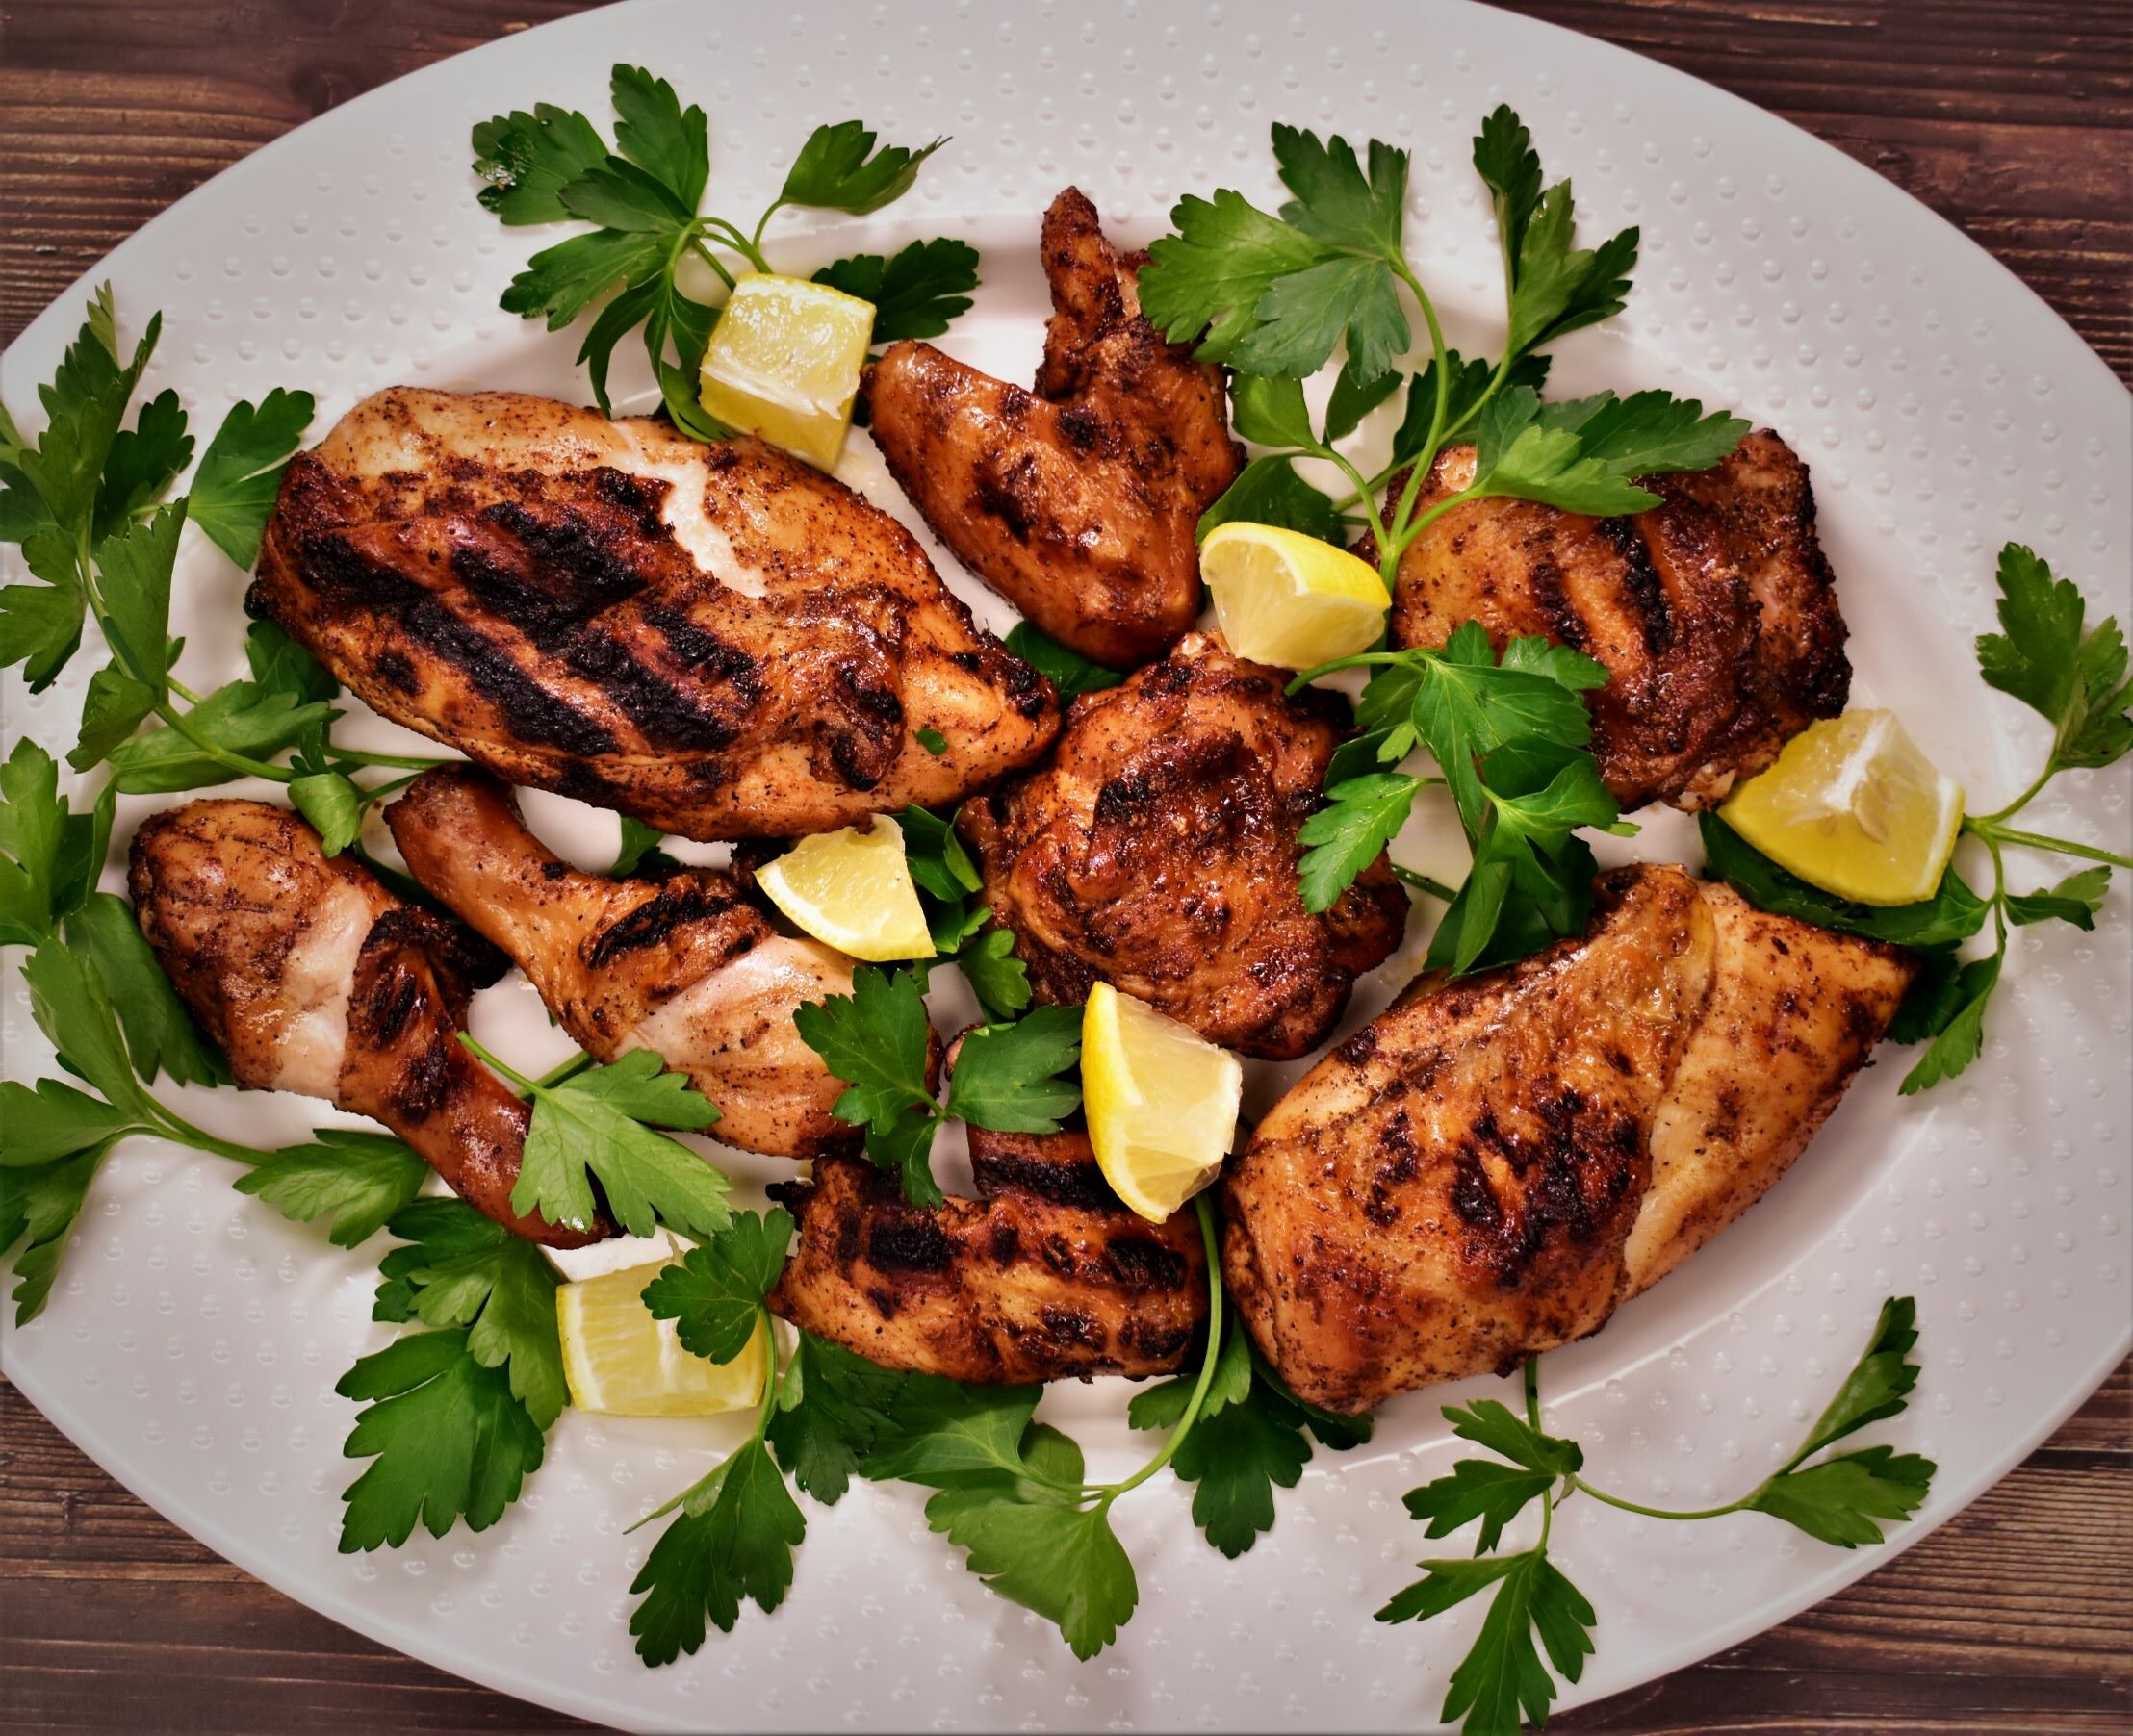 a plate of barbecue magic rotated chicken with full basil leaves and lemon cubes for garnish